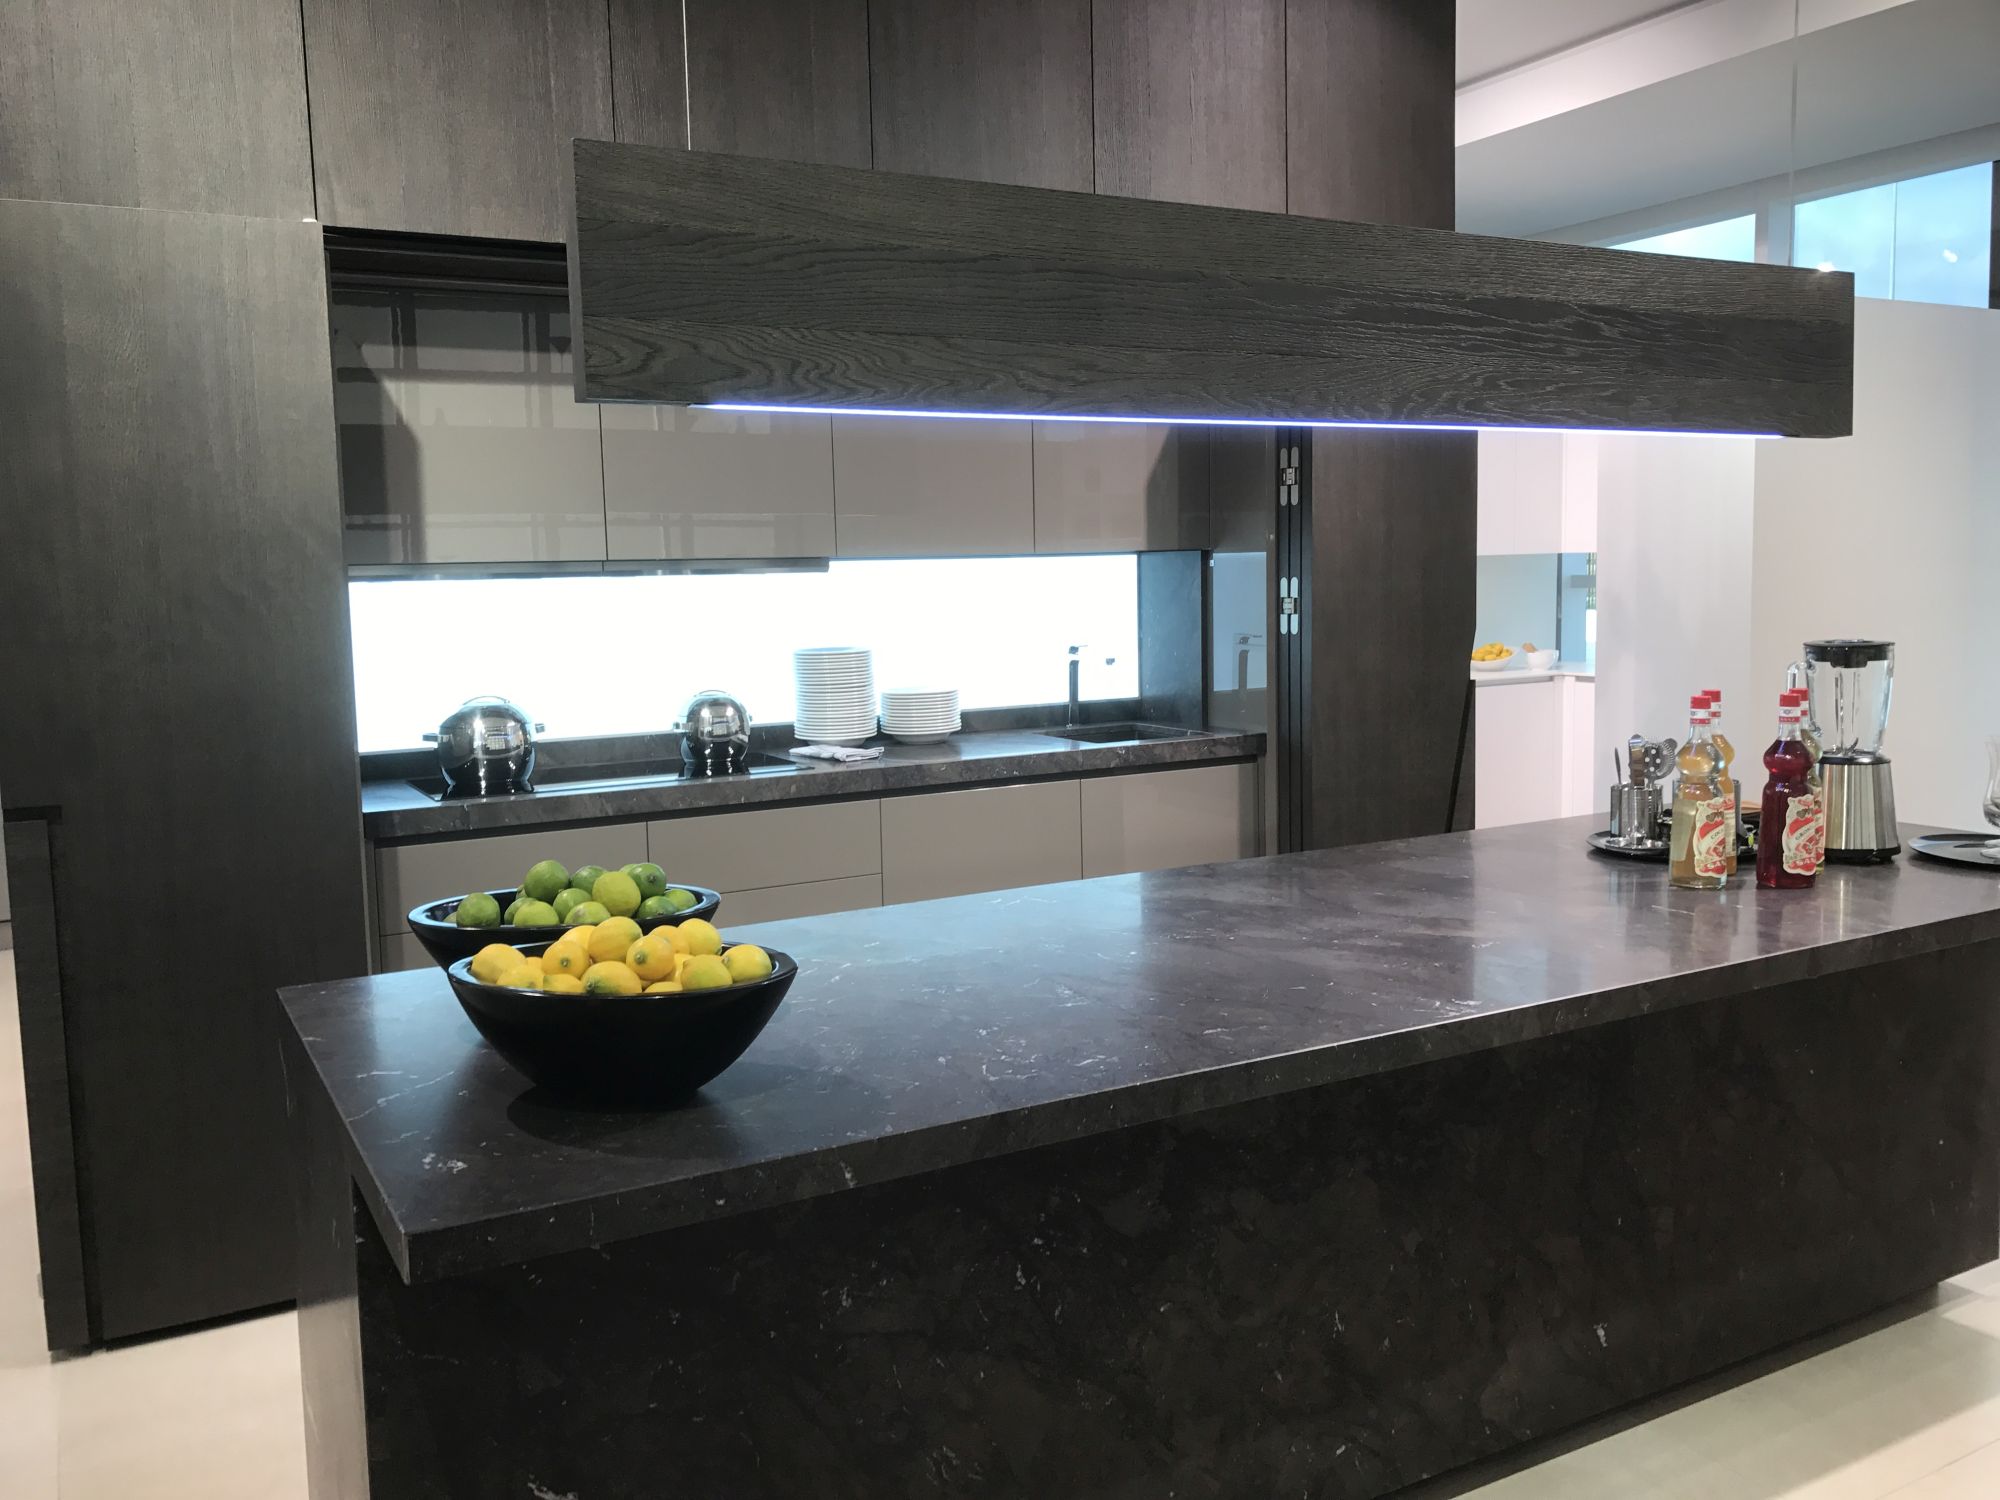 State of the art kitchen with stone inspired island - GamaDecor